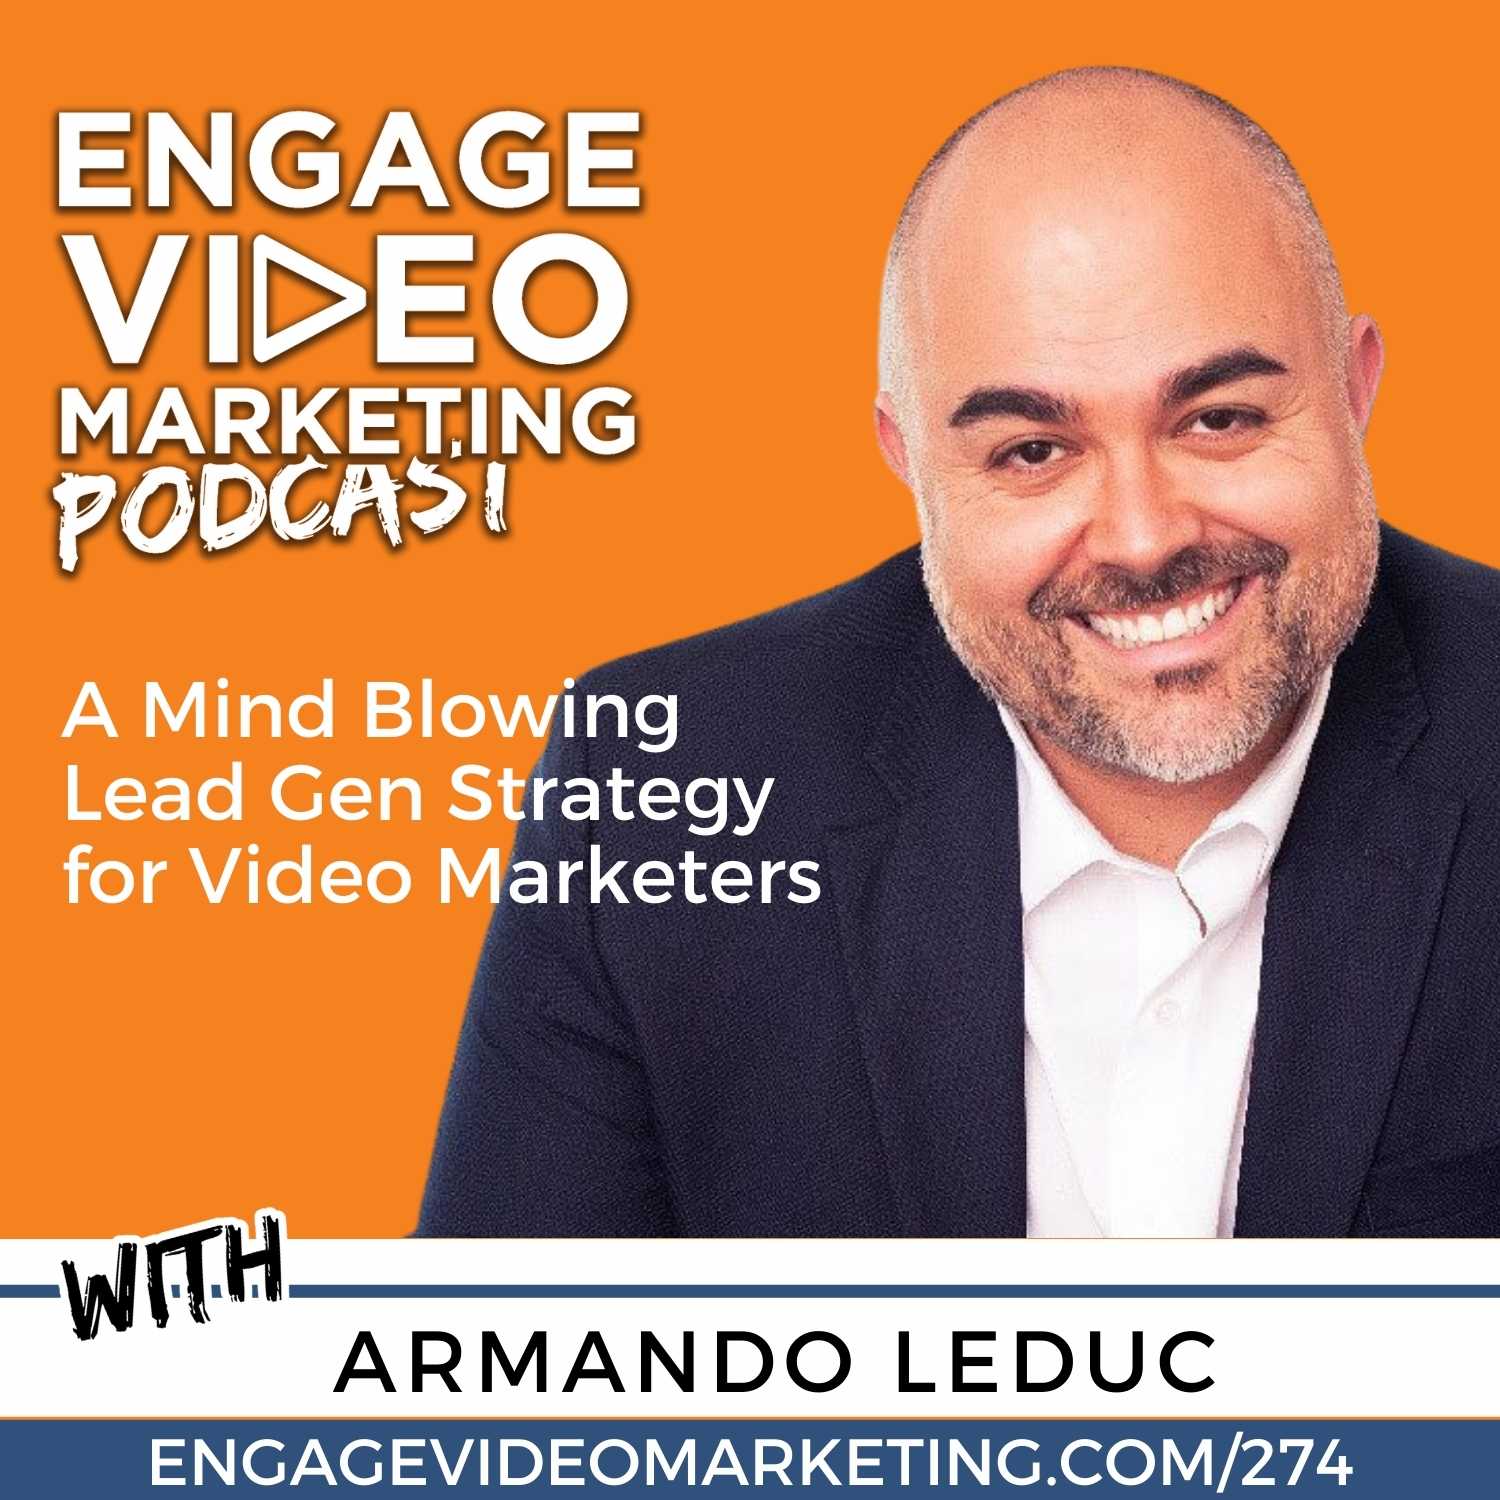 A Mind Blowing Lead Gen Strategy for Video Marketers with Armando Leduc